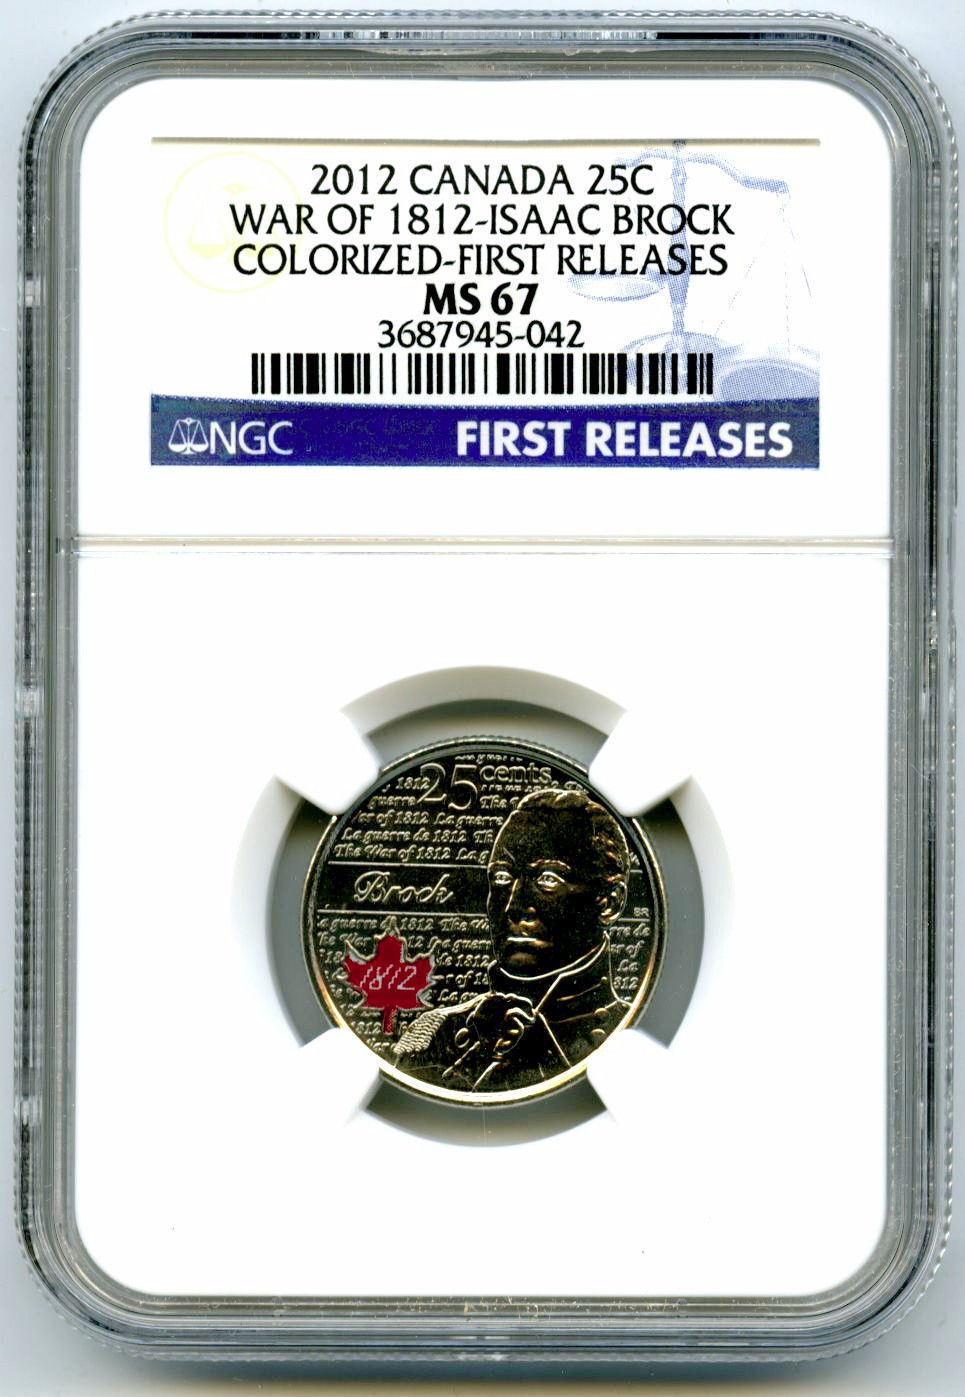 2012 CANADA WAR OF 1812 SIR ISAAC BROCK NGC MS67 COLORIZED QUARTER FIRST RELEASE